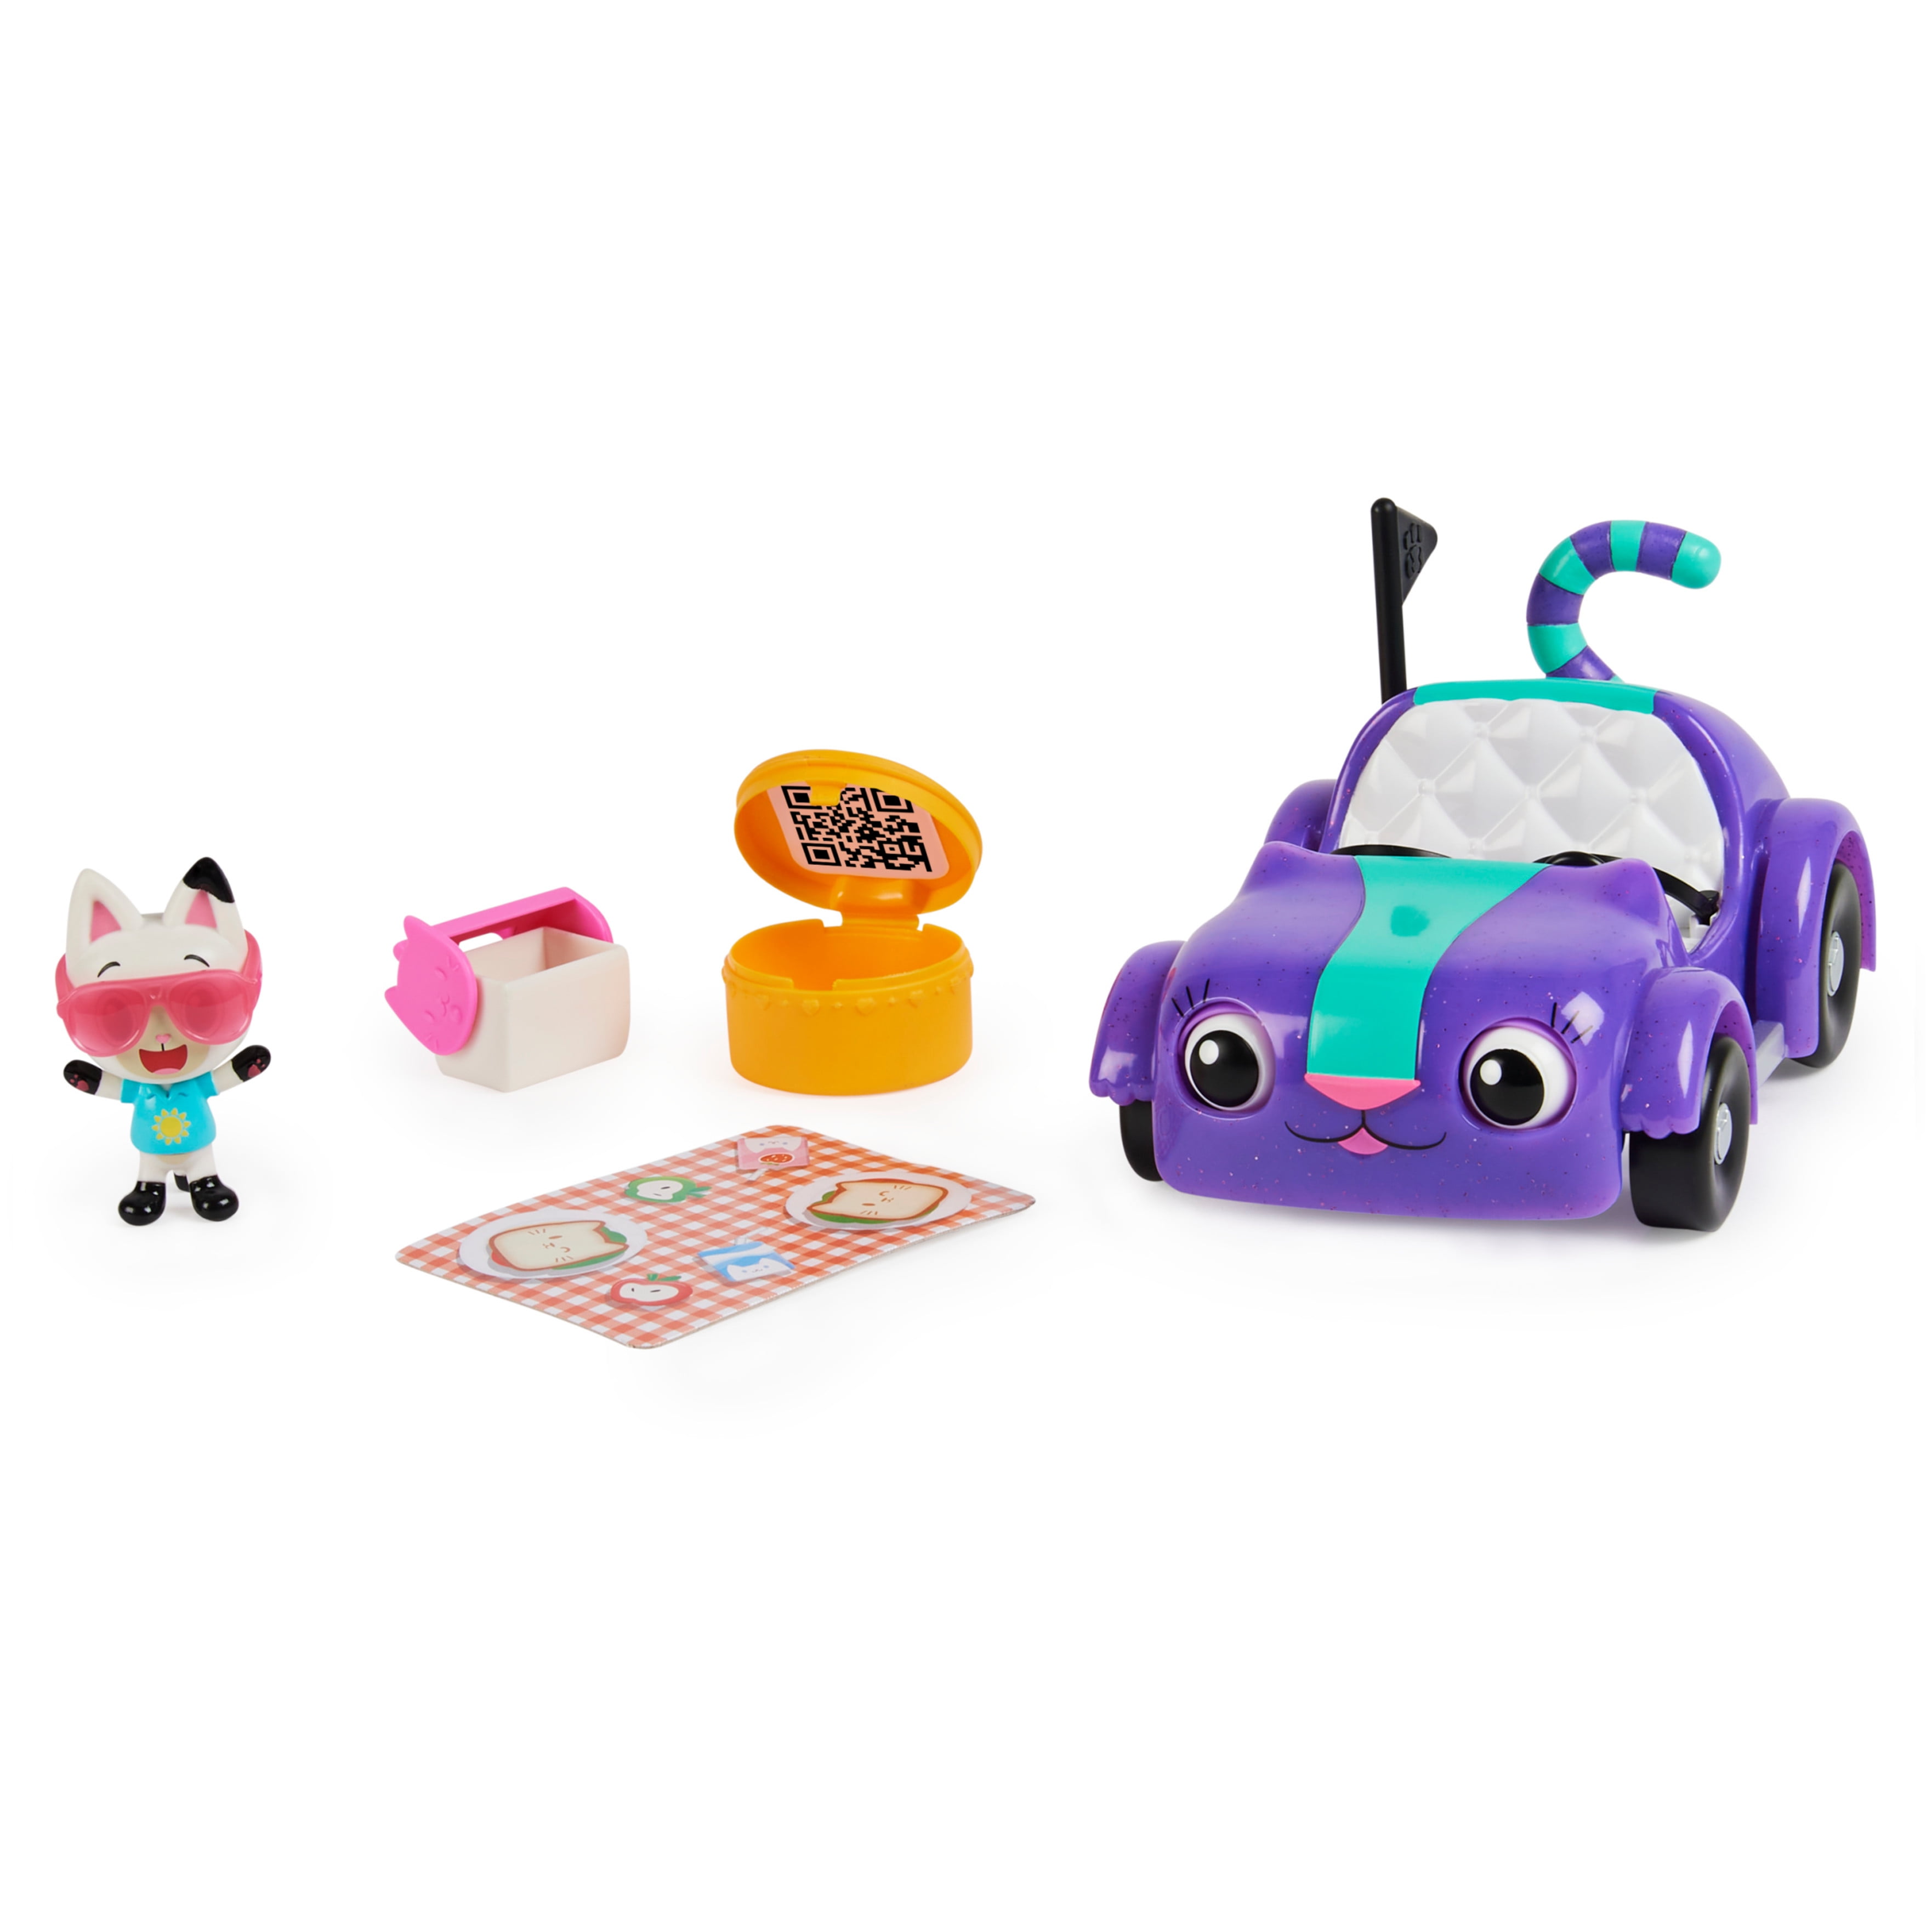 Gabby’s Dollhouse, Carlita Toy Car with Pandy Paws Collectible Figure and 2 Accessories, Kids Toys for Ages 3 and up